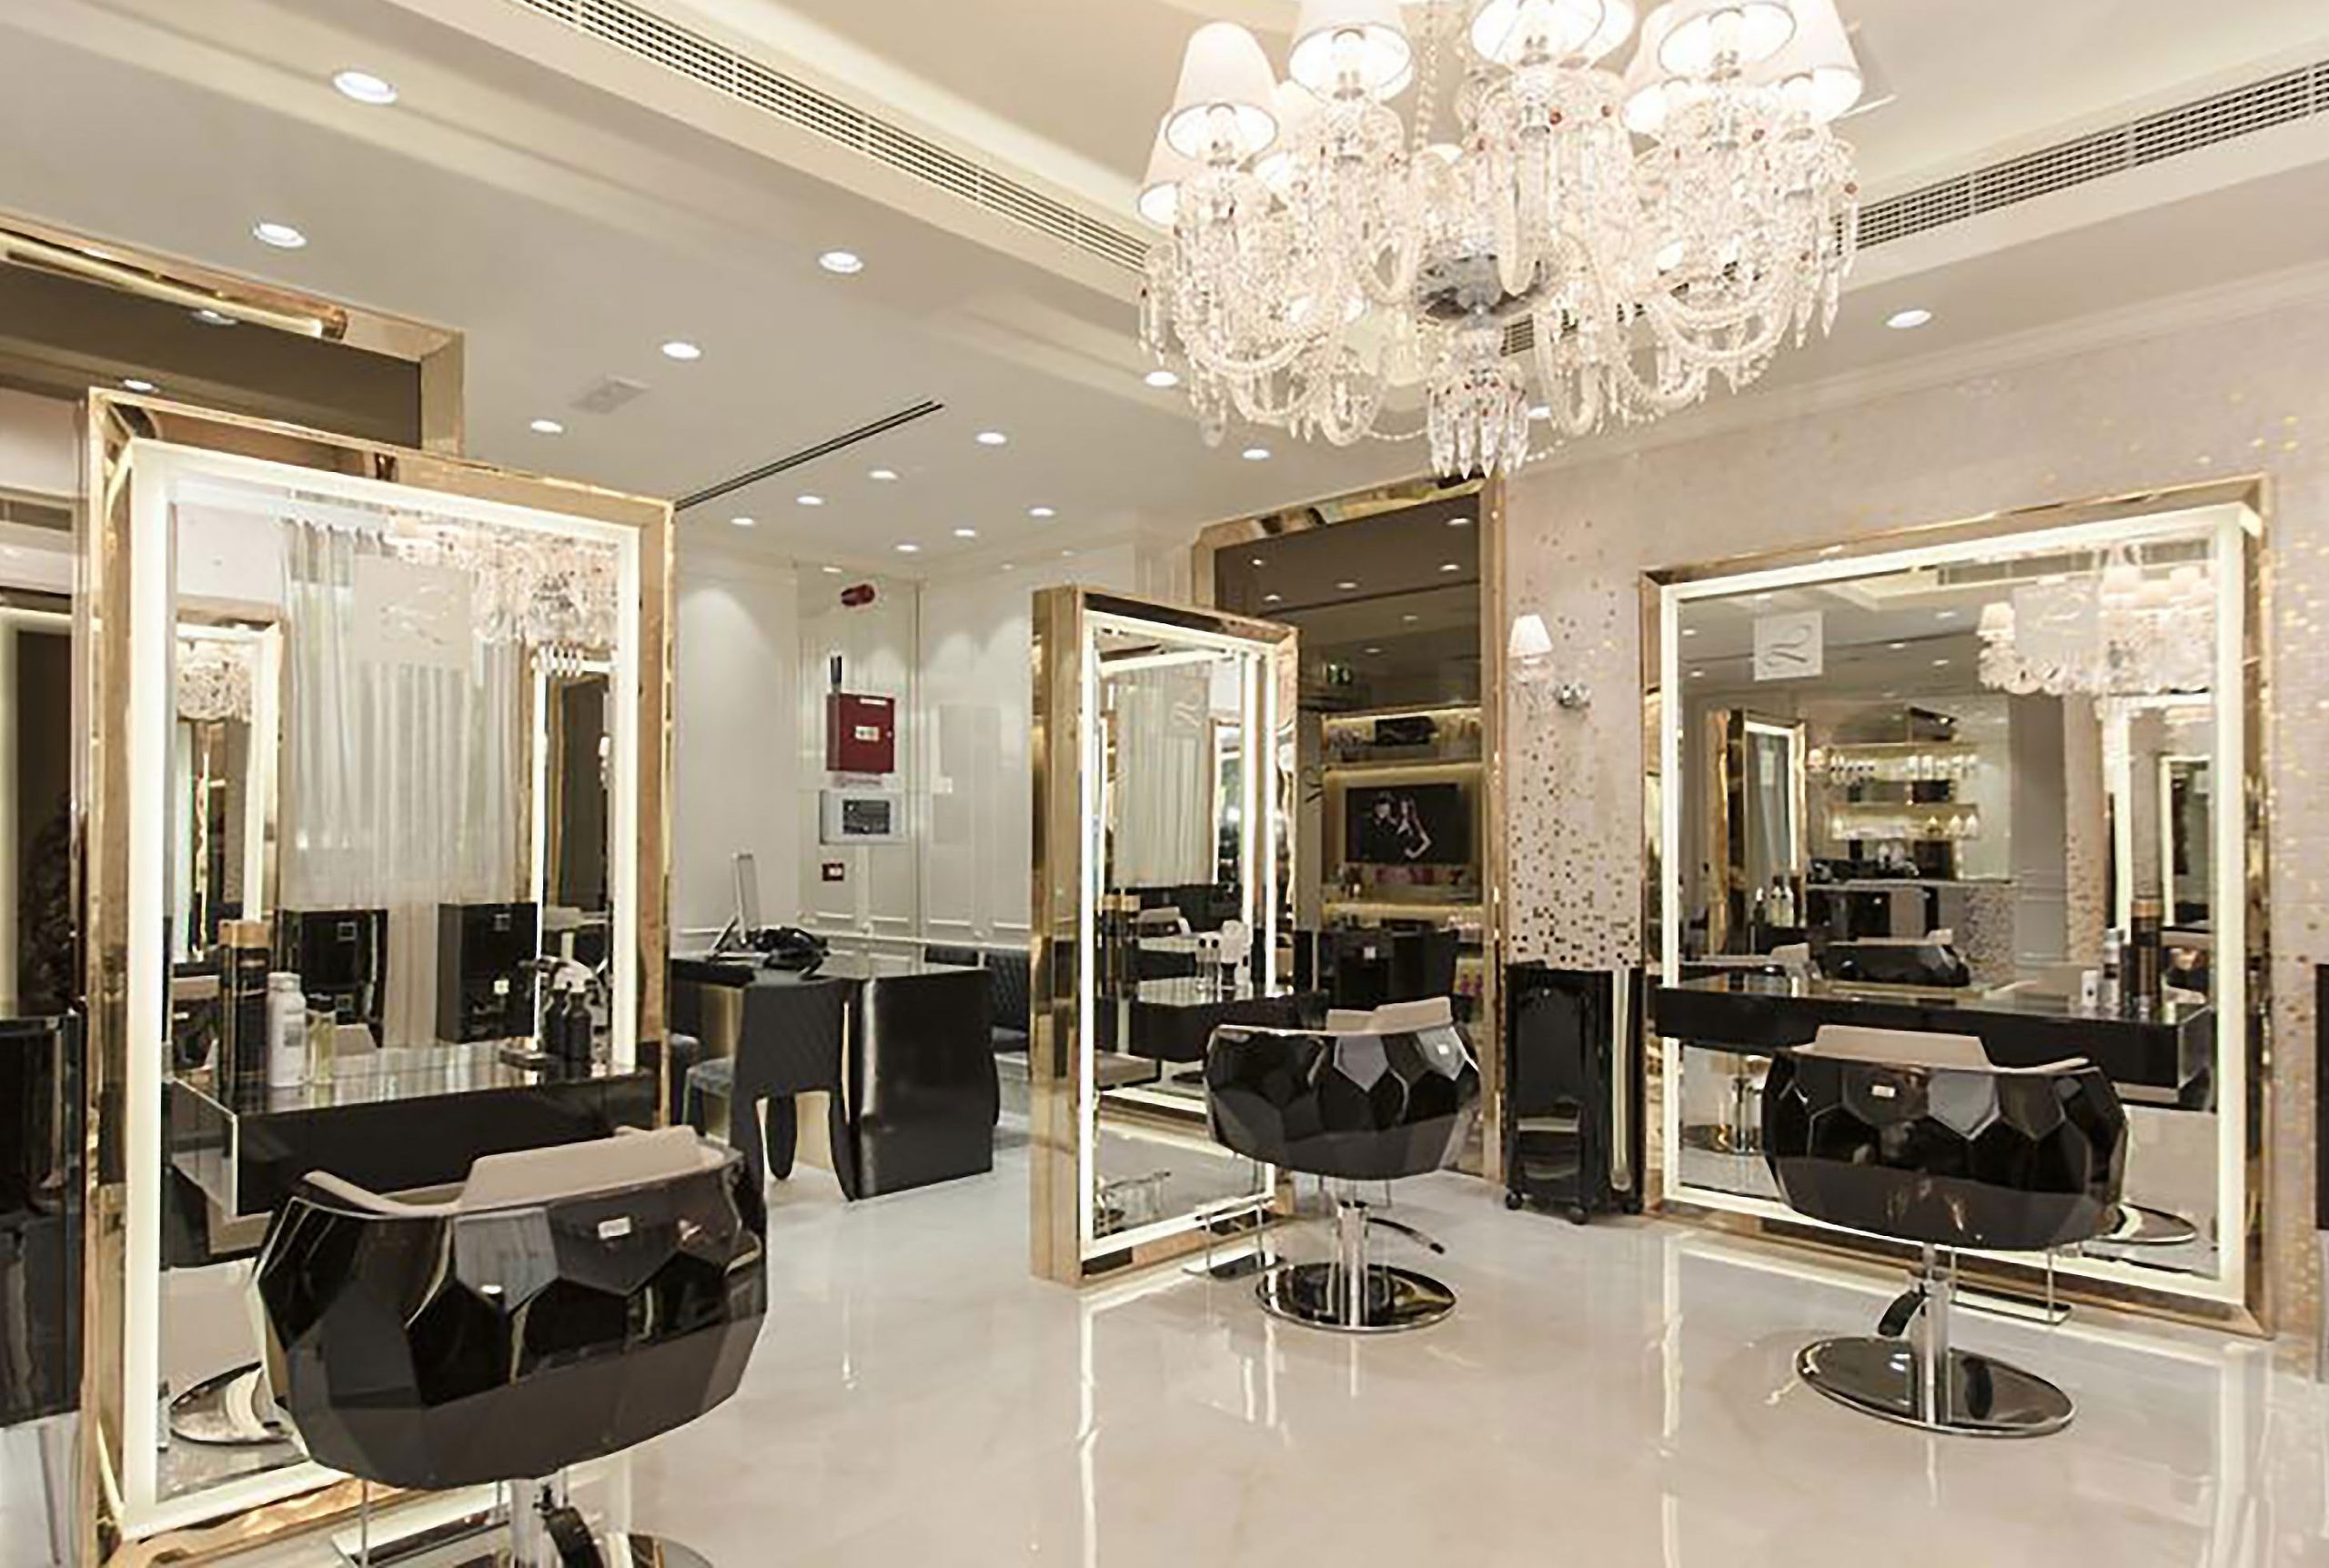 How to Book Online Hair Salon in Dubai - Natforce Latest News 2021 & 2022  From Across the Worlds